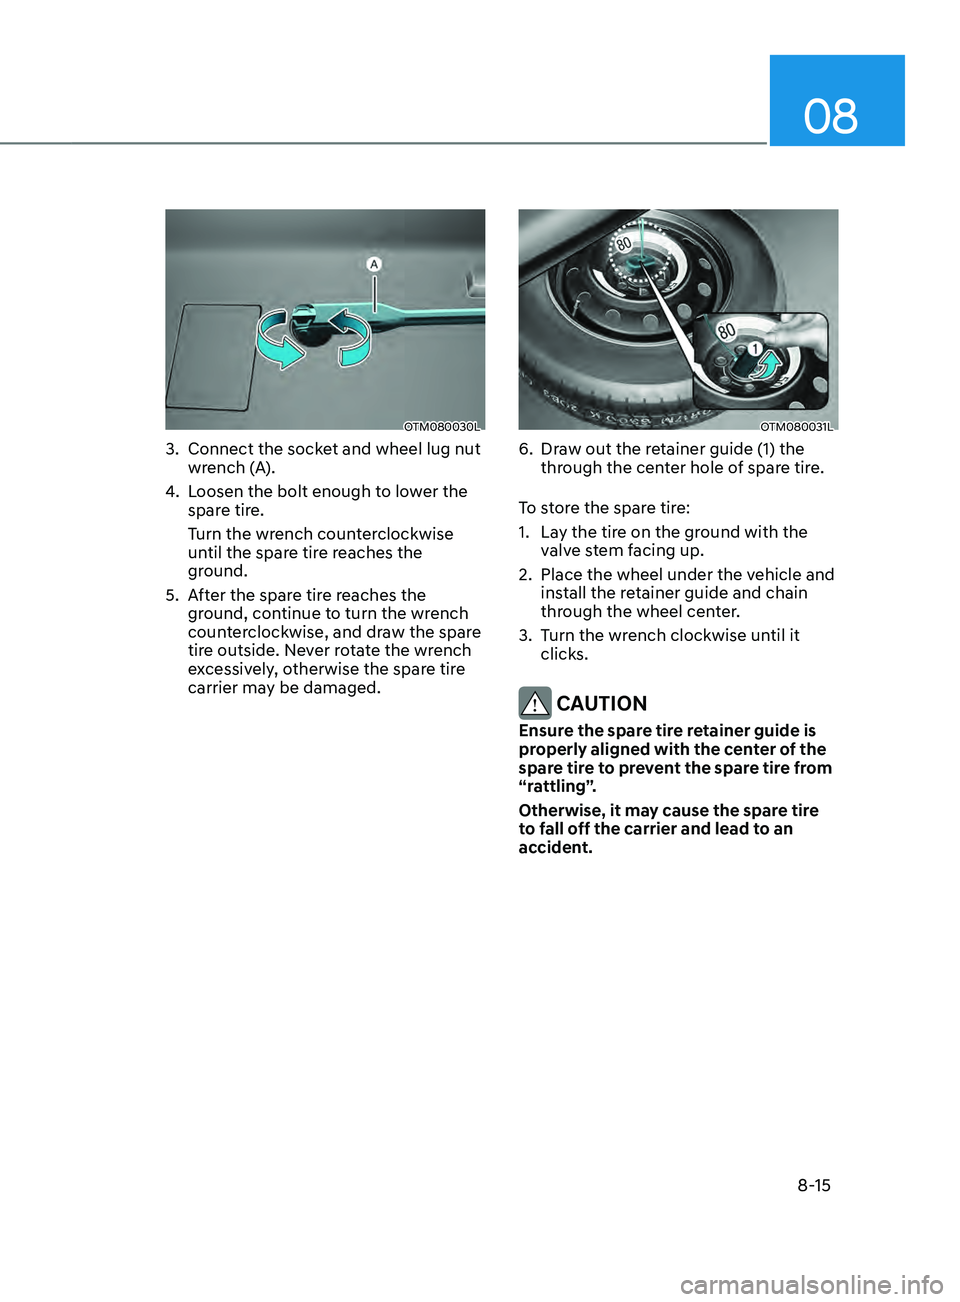 HYUNDAI SANTA FE 2021  Owners Manual 08
8-15
OTM080030L
3. Connect the socket and wheel lug nut 
wrench (A).
4.
 Loosen the bolt enough t

o lower the 
spare tire.
Turn the wrench counterclockwise 
until the spare tire reaches the 
groun